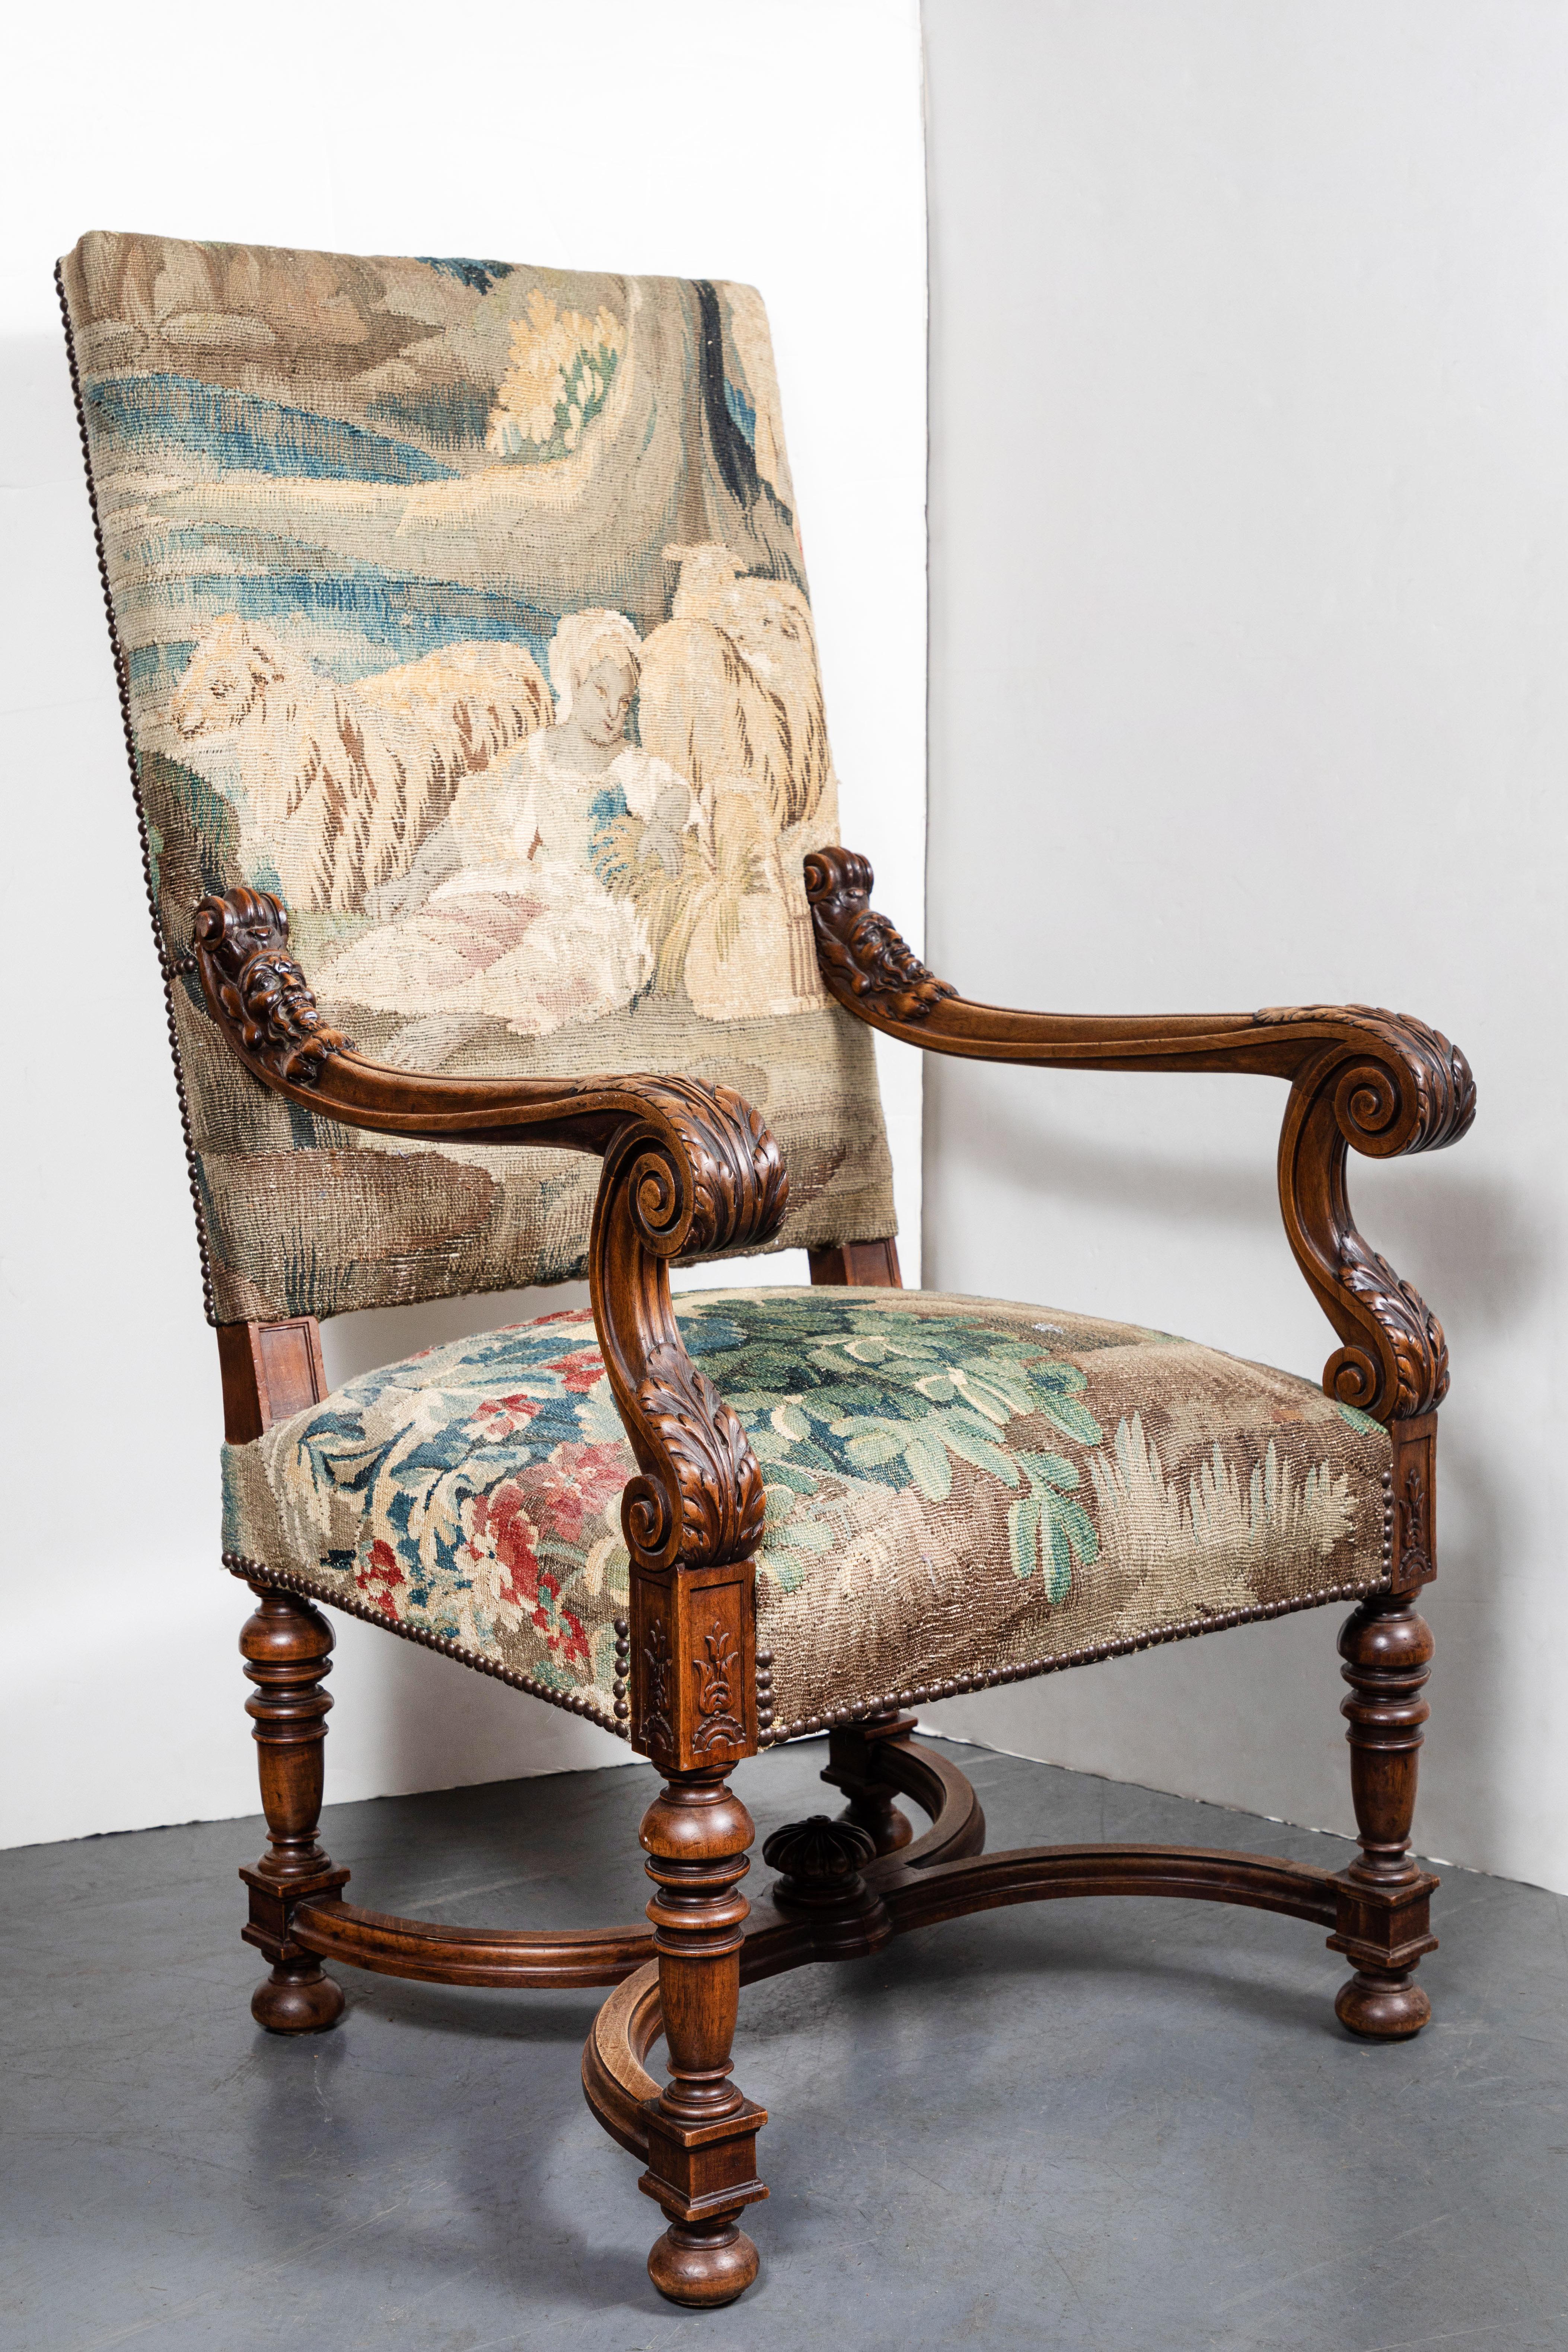 Elegantly carved, circa 1850, French armchair with scrolling, foliate embellished arm rests, and a sleek, X-form stretcher. The whole covered in 18th century, Flemish tapestry trimmed with bronze nail heads.